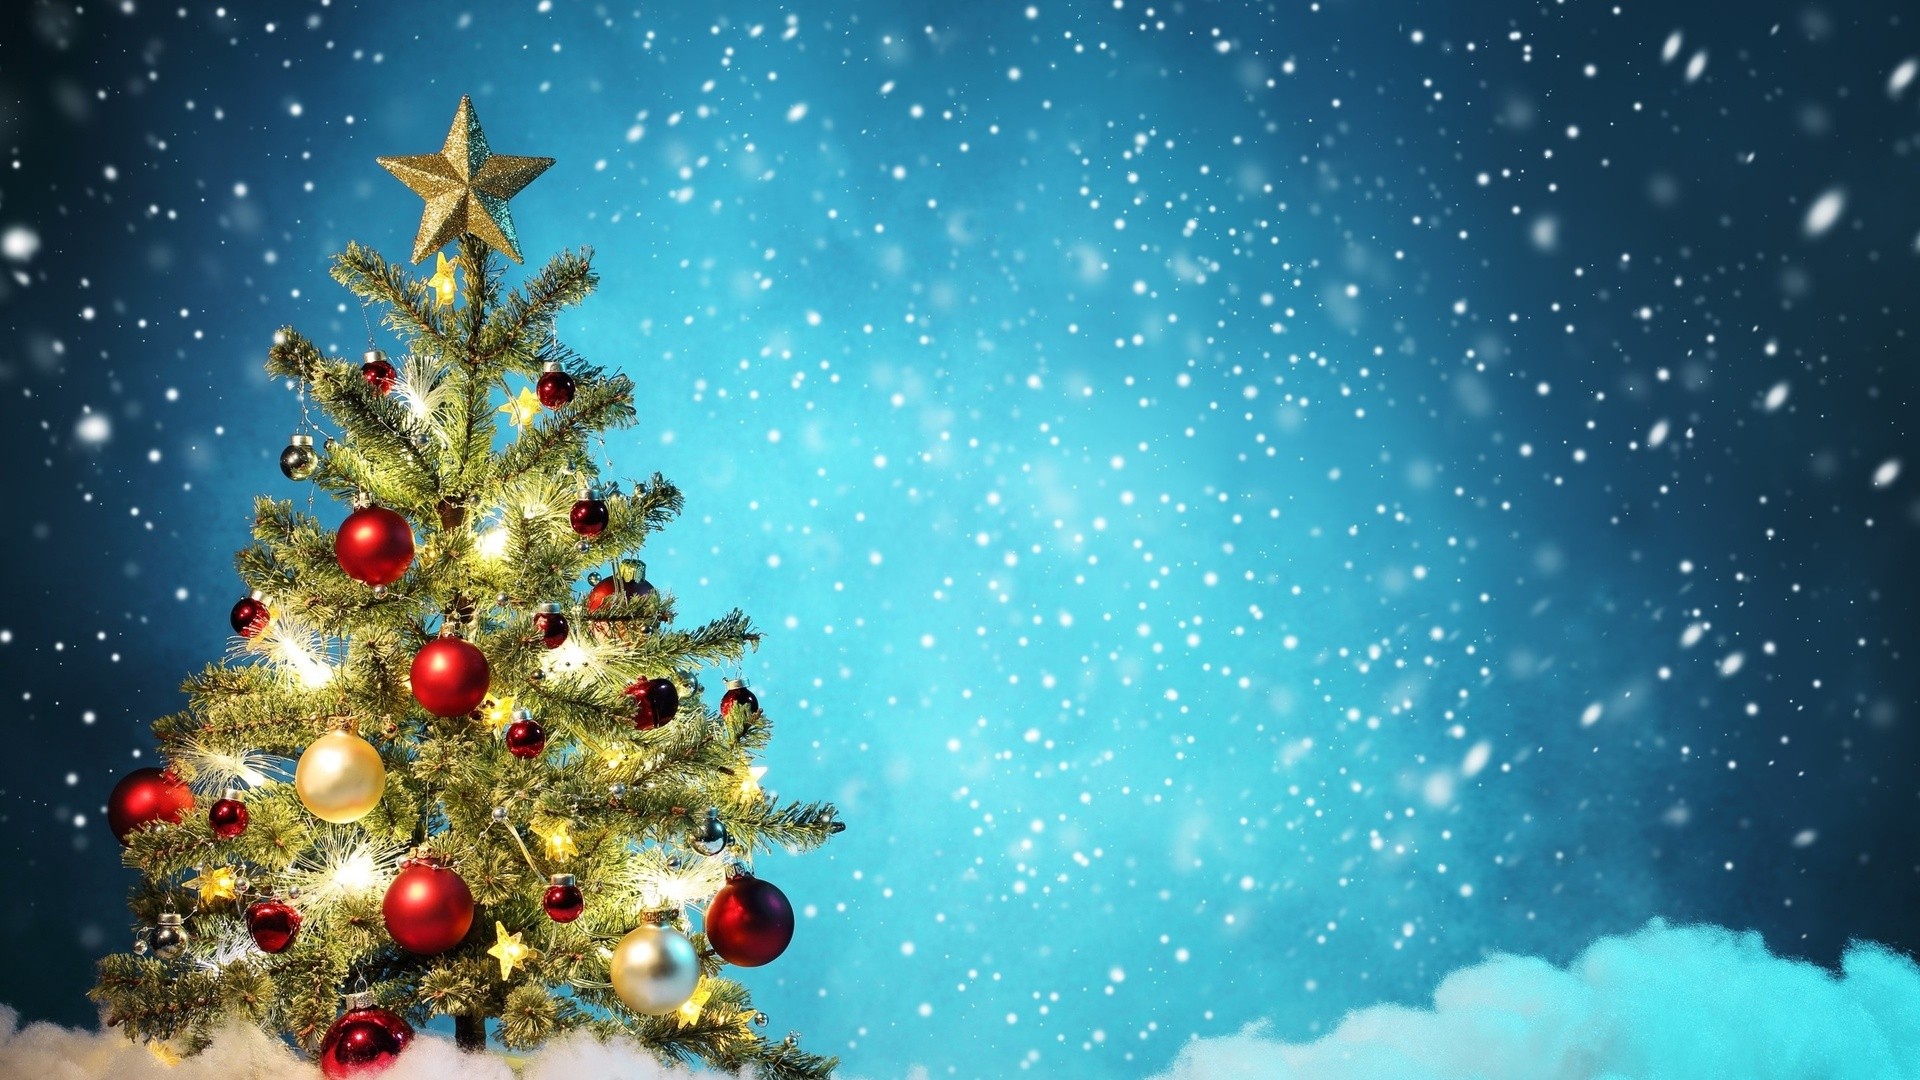 Free download Picture Christmas Background Desktop Wallpaper High Definition [1920x1080] for your Desktop, Mobile & Tablet. Explore Free Christmas Background Image. Free Christmas Wallpaper, Christmas Desktop Free Theme Wallpaper